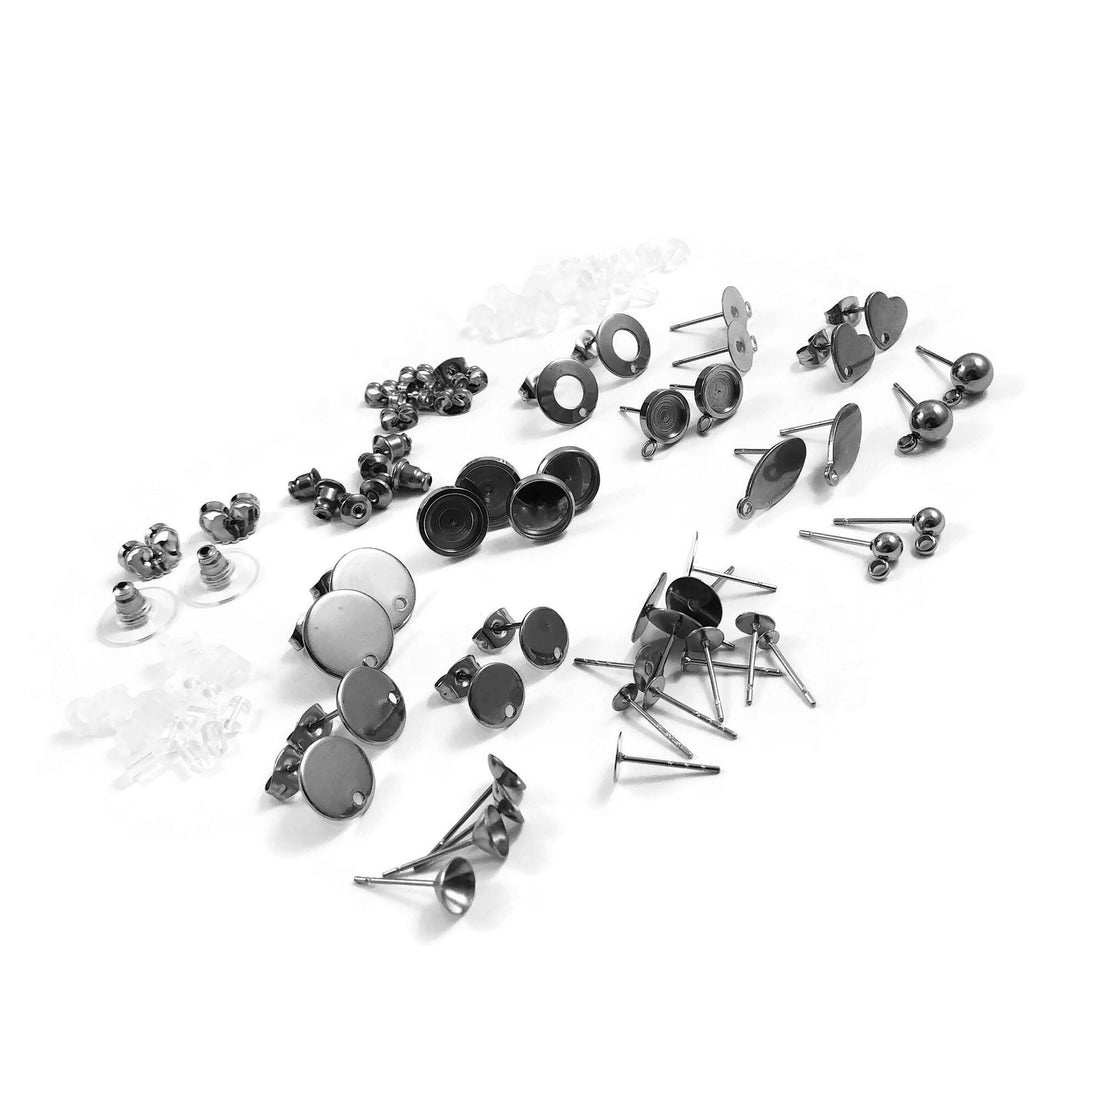 Earring making starter kit, Stainless steel posts 60pcs, Hypoallergenic stud jewelry findings, Sample pack